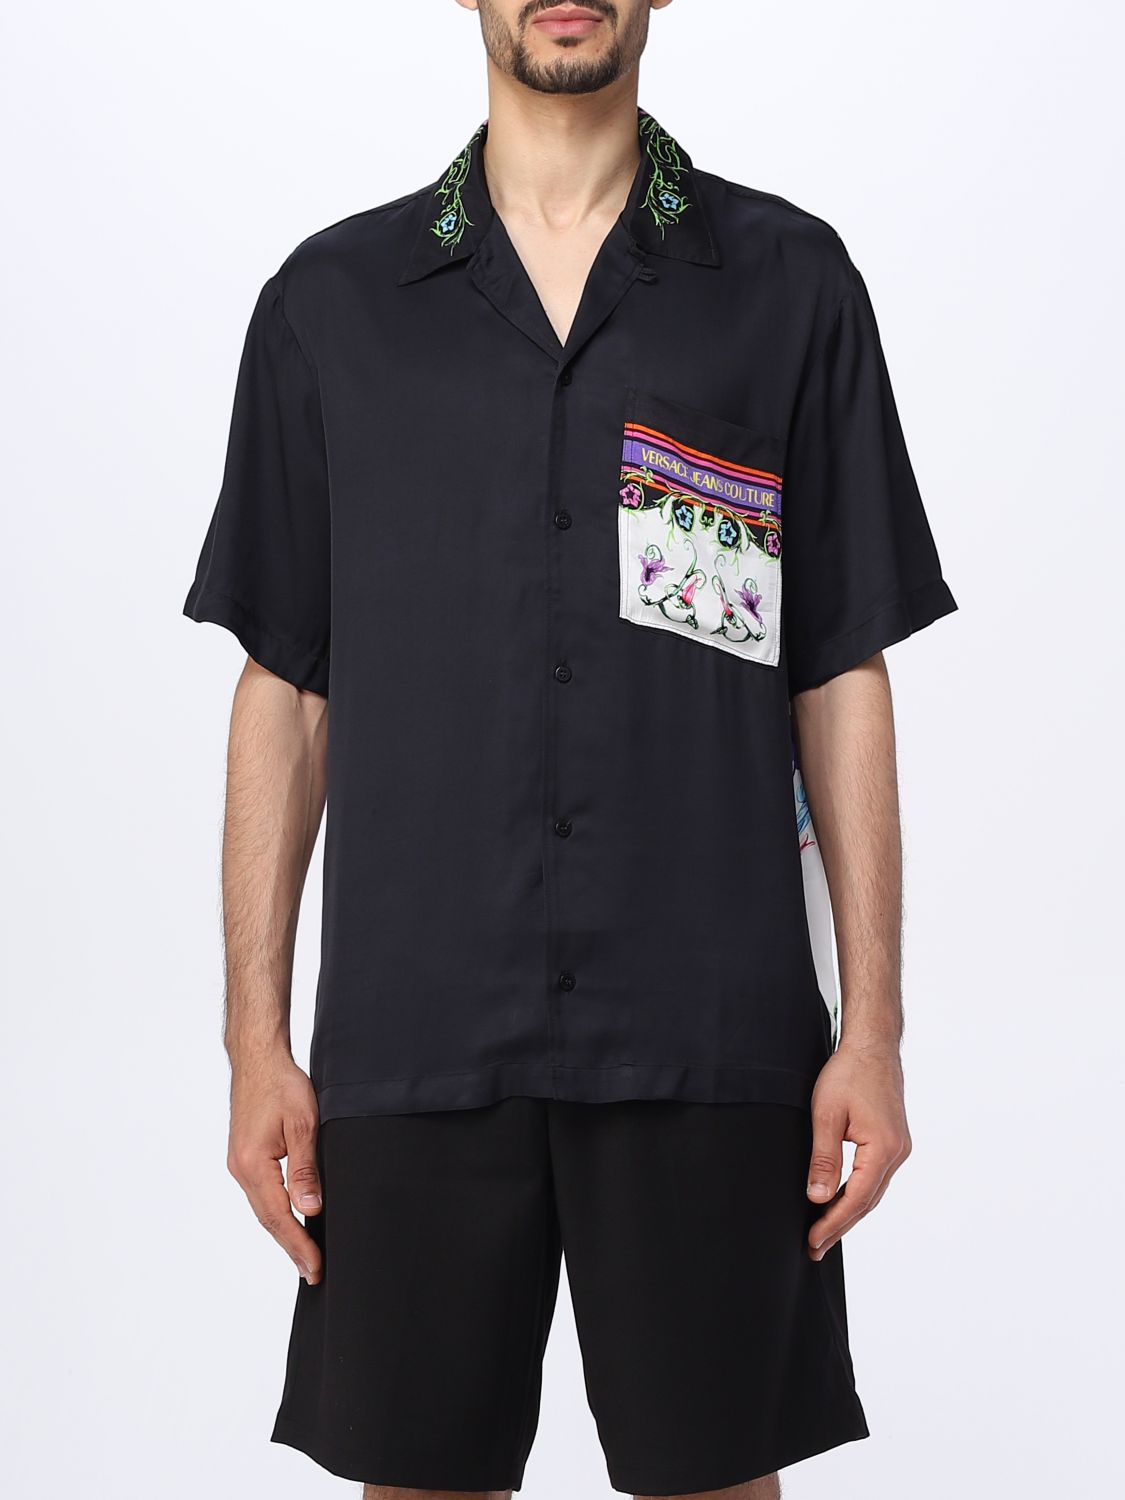 VERSACE JEANS COUTURE: shirt for man - Black | Versace Jeans Couture ...